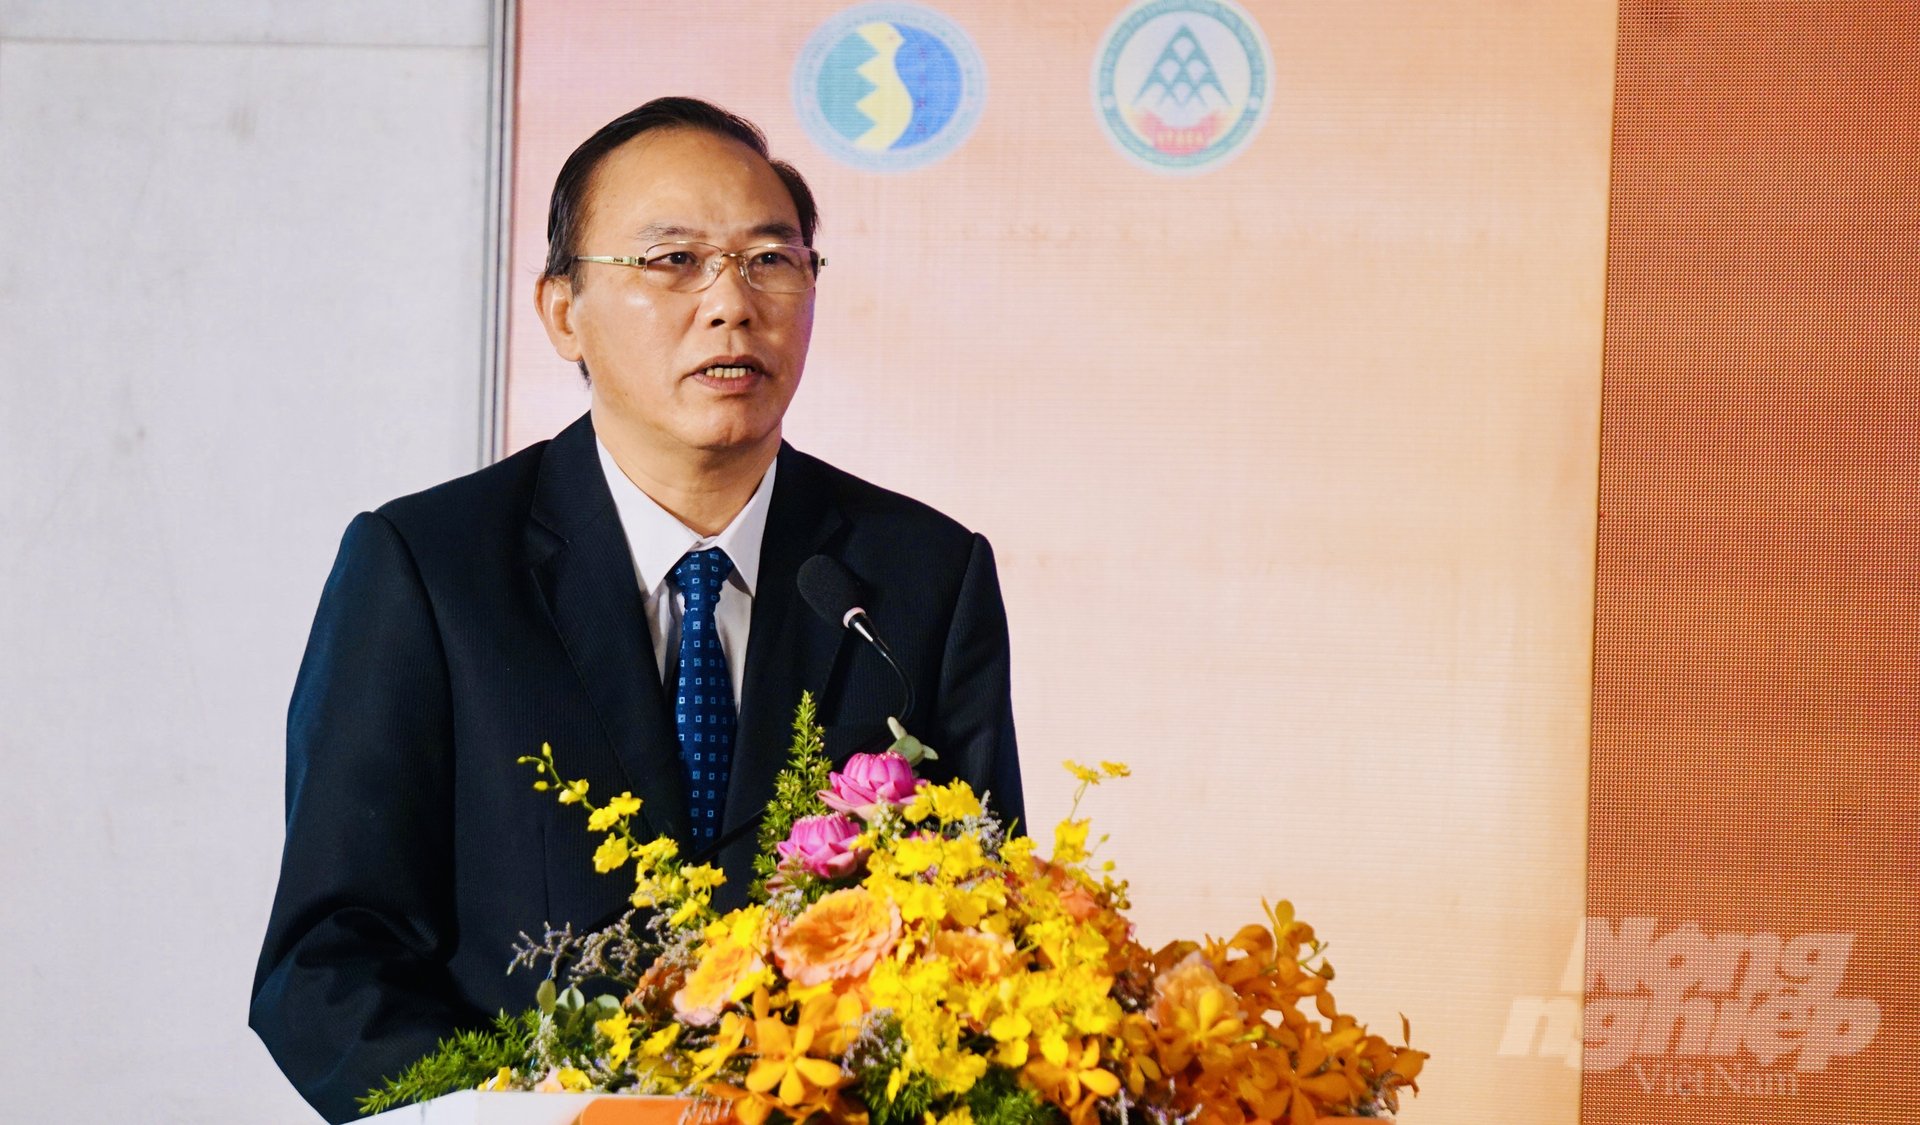 Deputy Minister of Agriculture and Rural Development Phung Duc Tien. Photo: Nguyen Thuy.